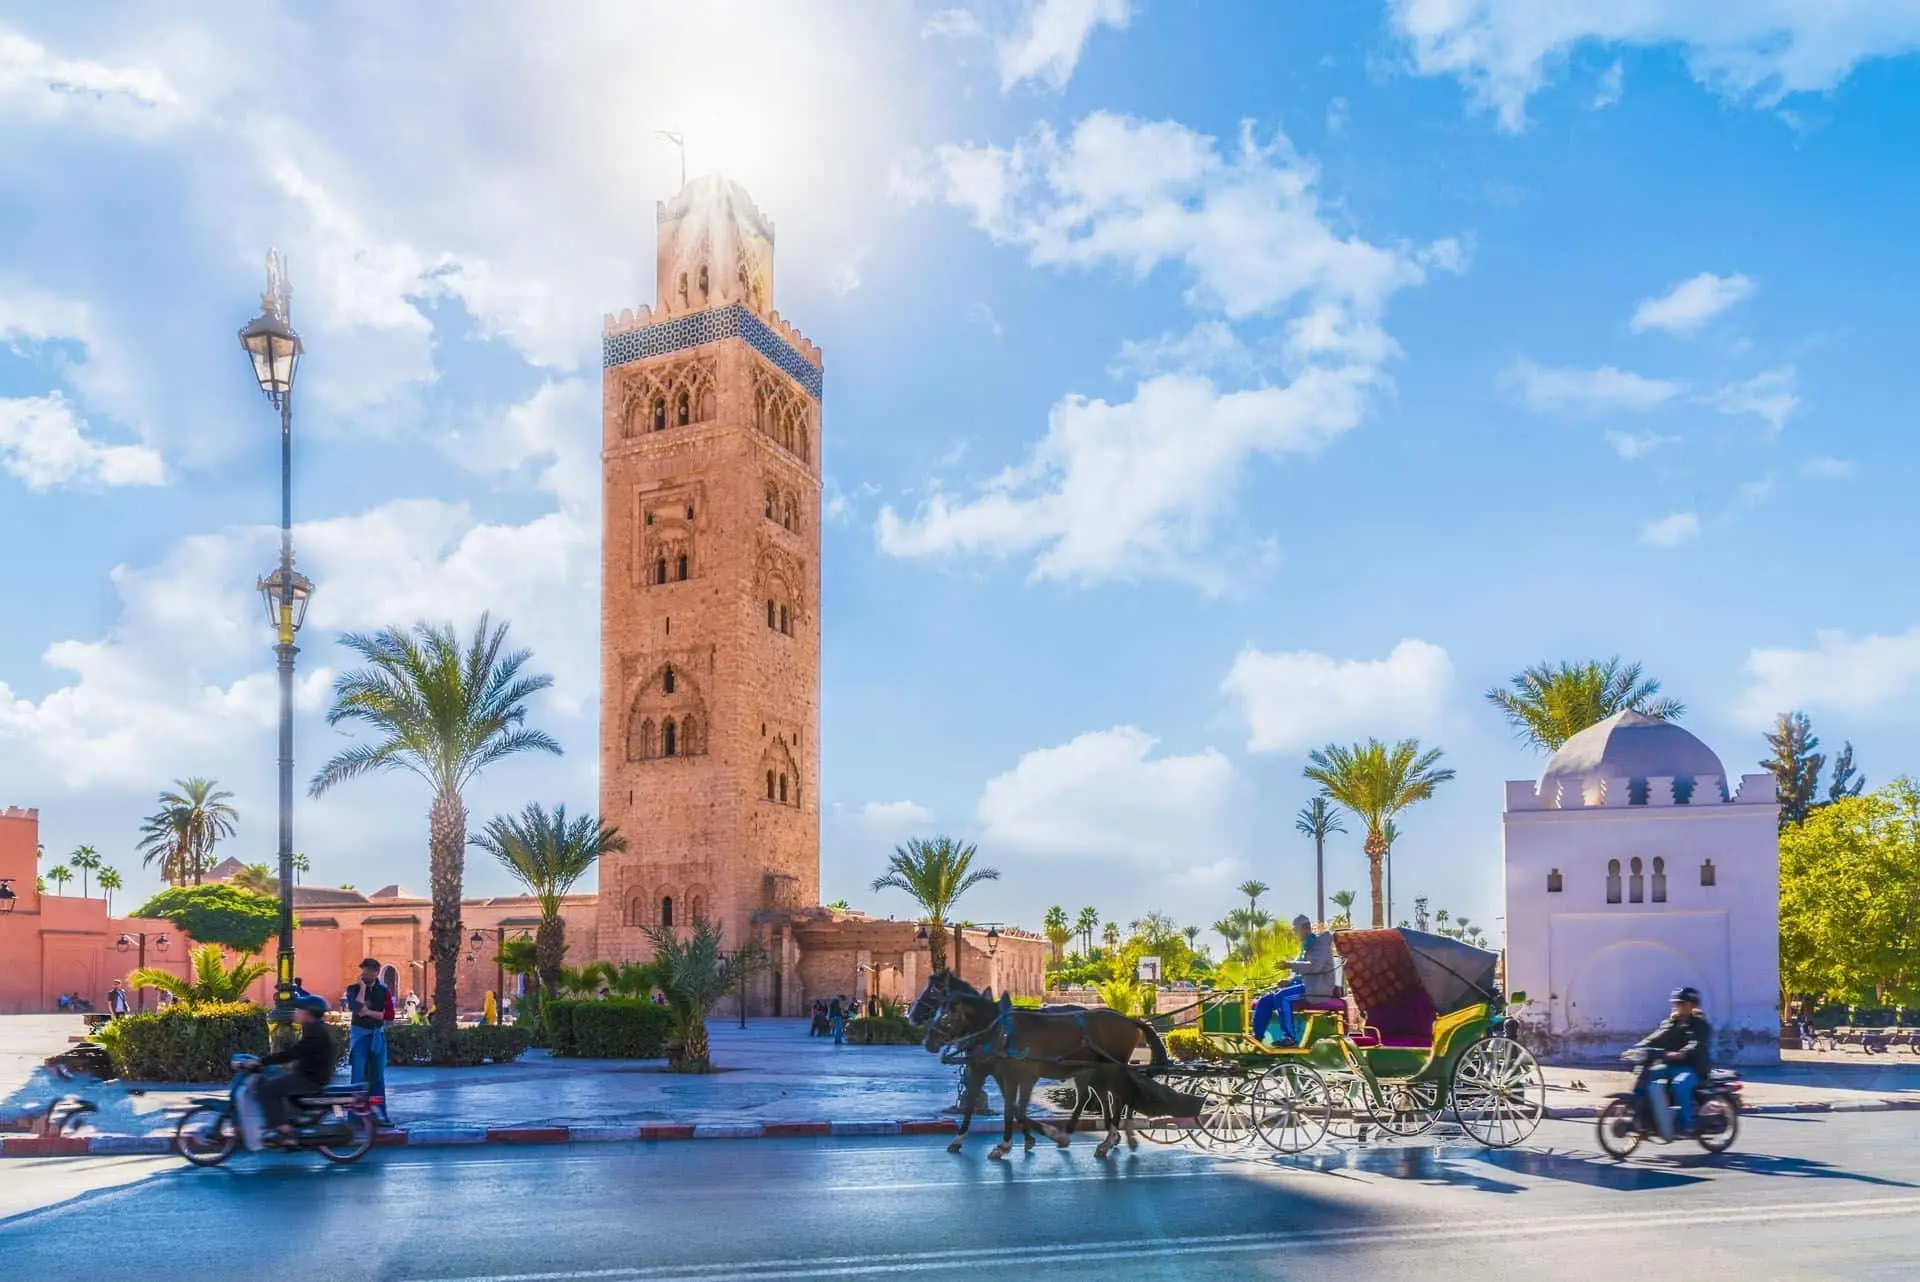 Marrakech The Ultimate Mythic , Tour Excursions and if you want to stretch your vacation as long as possible Marrakech the perfect getaway.